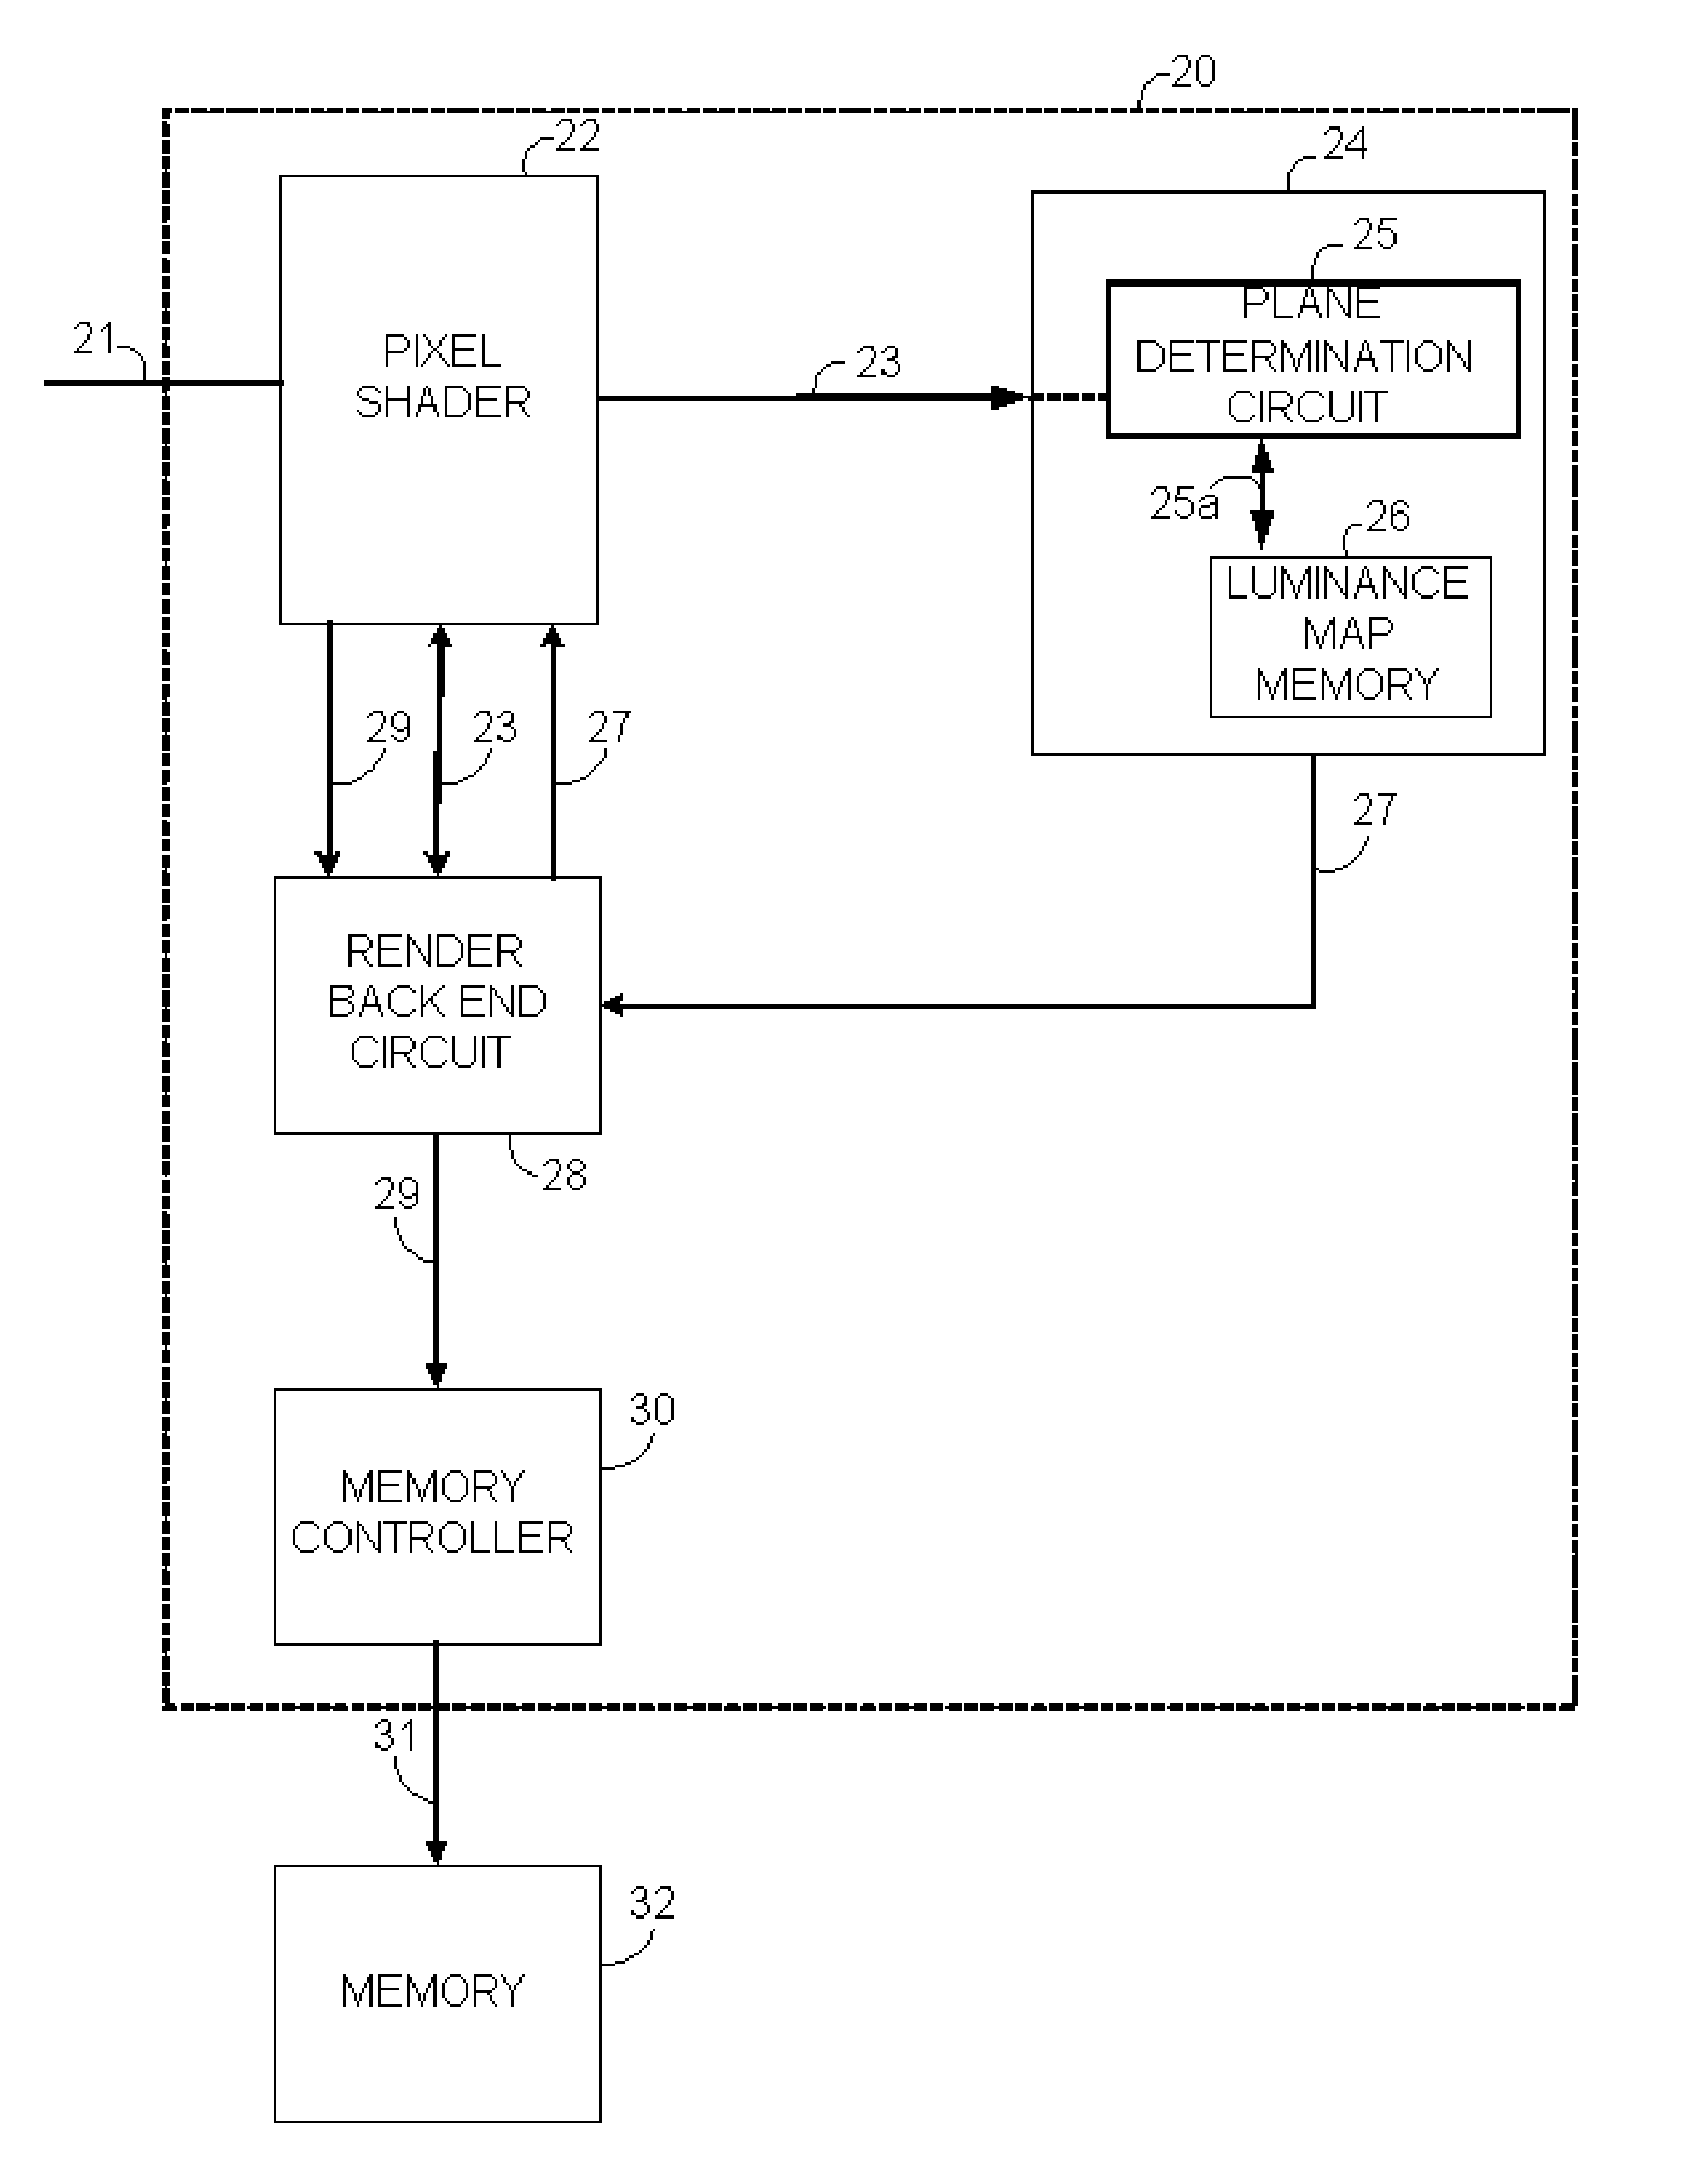 System and method for determining illumination of a pixel by shadow planes